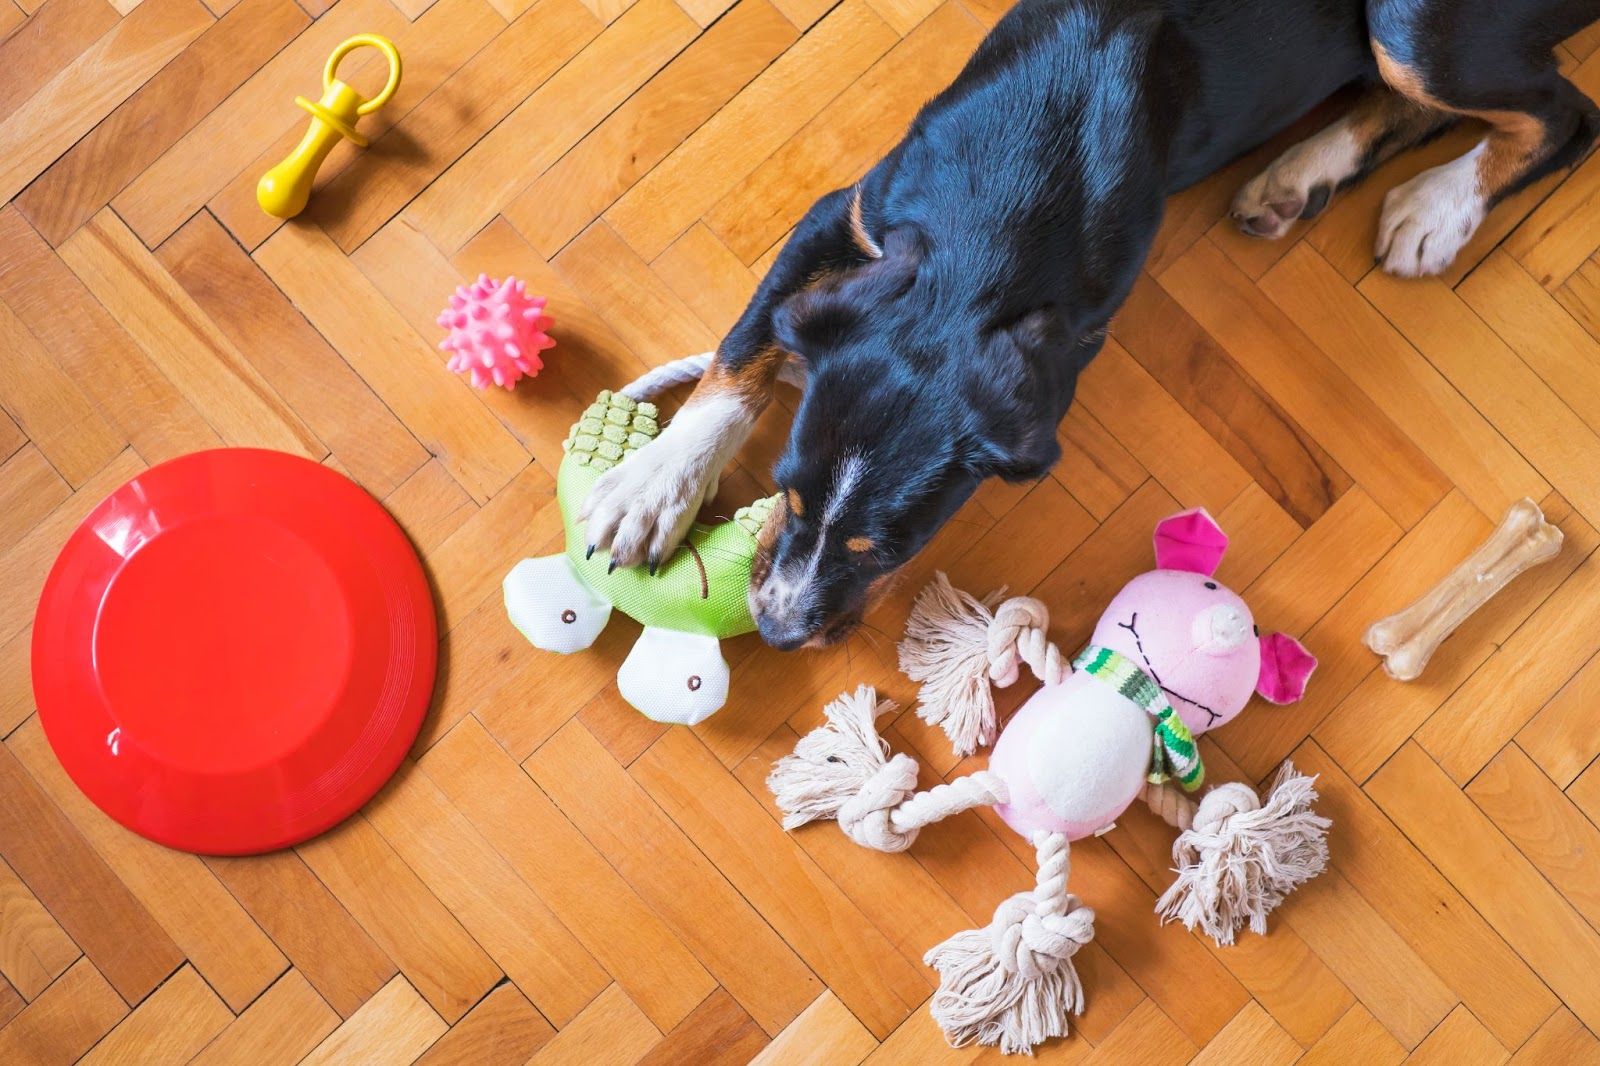 The Best Non-Squeaky Dog Toys of 2022